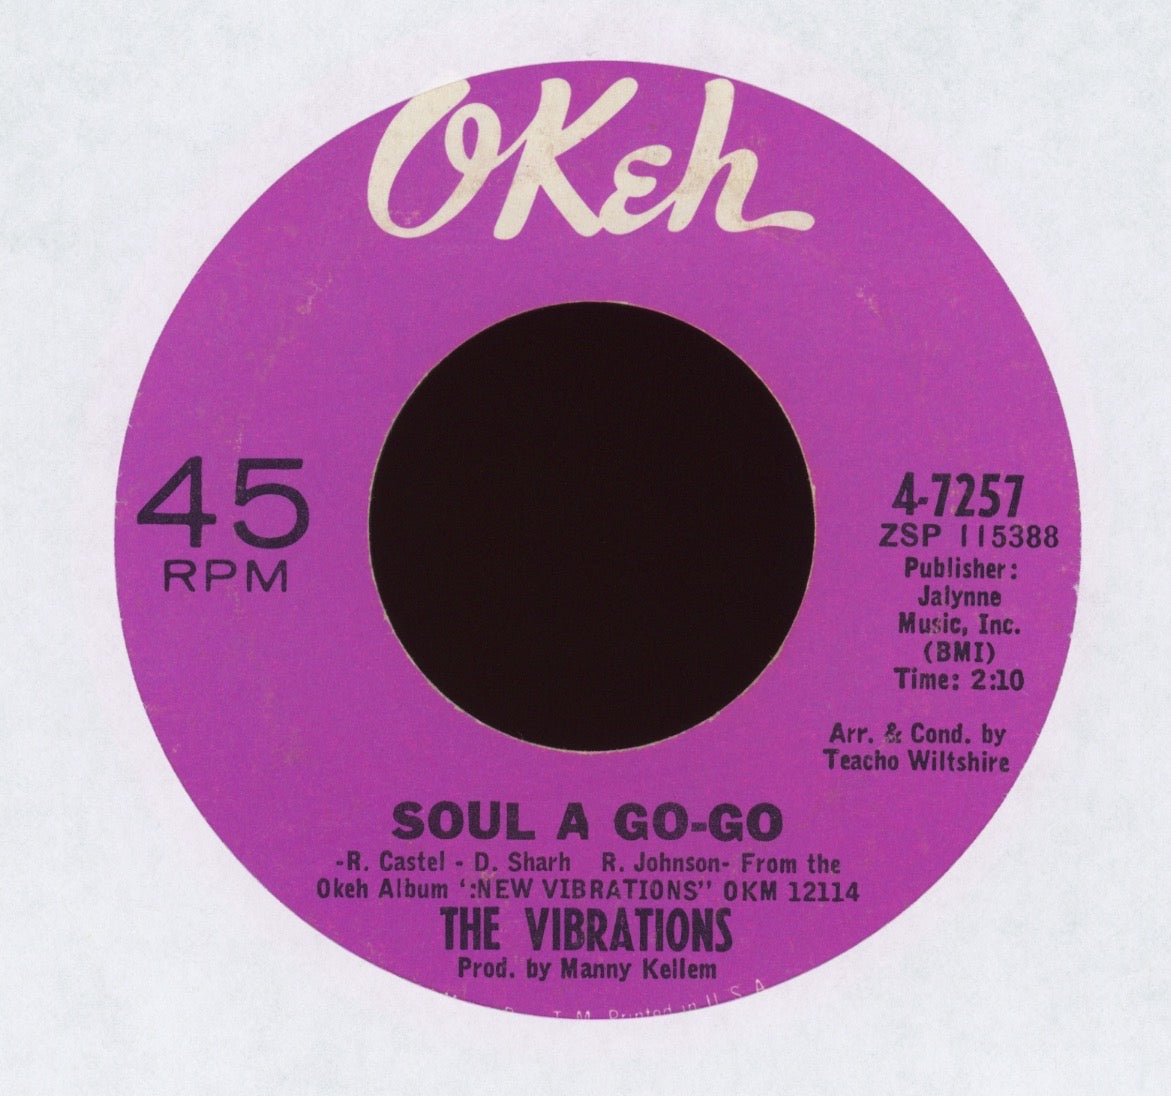 The Vibrations - Soul A Go-Go on Okeh Northern Soul 45